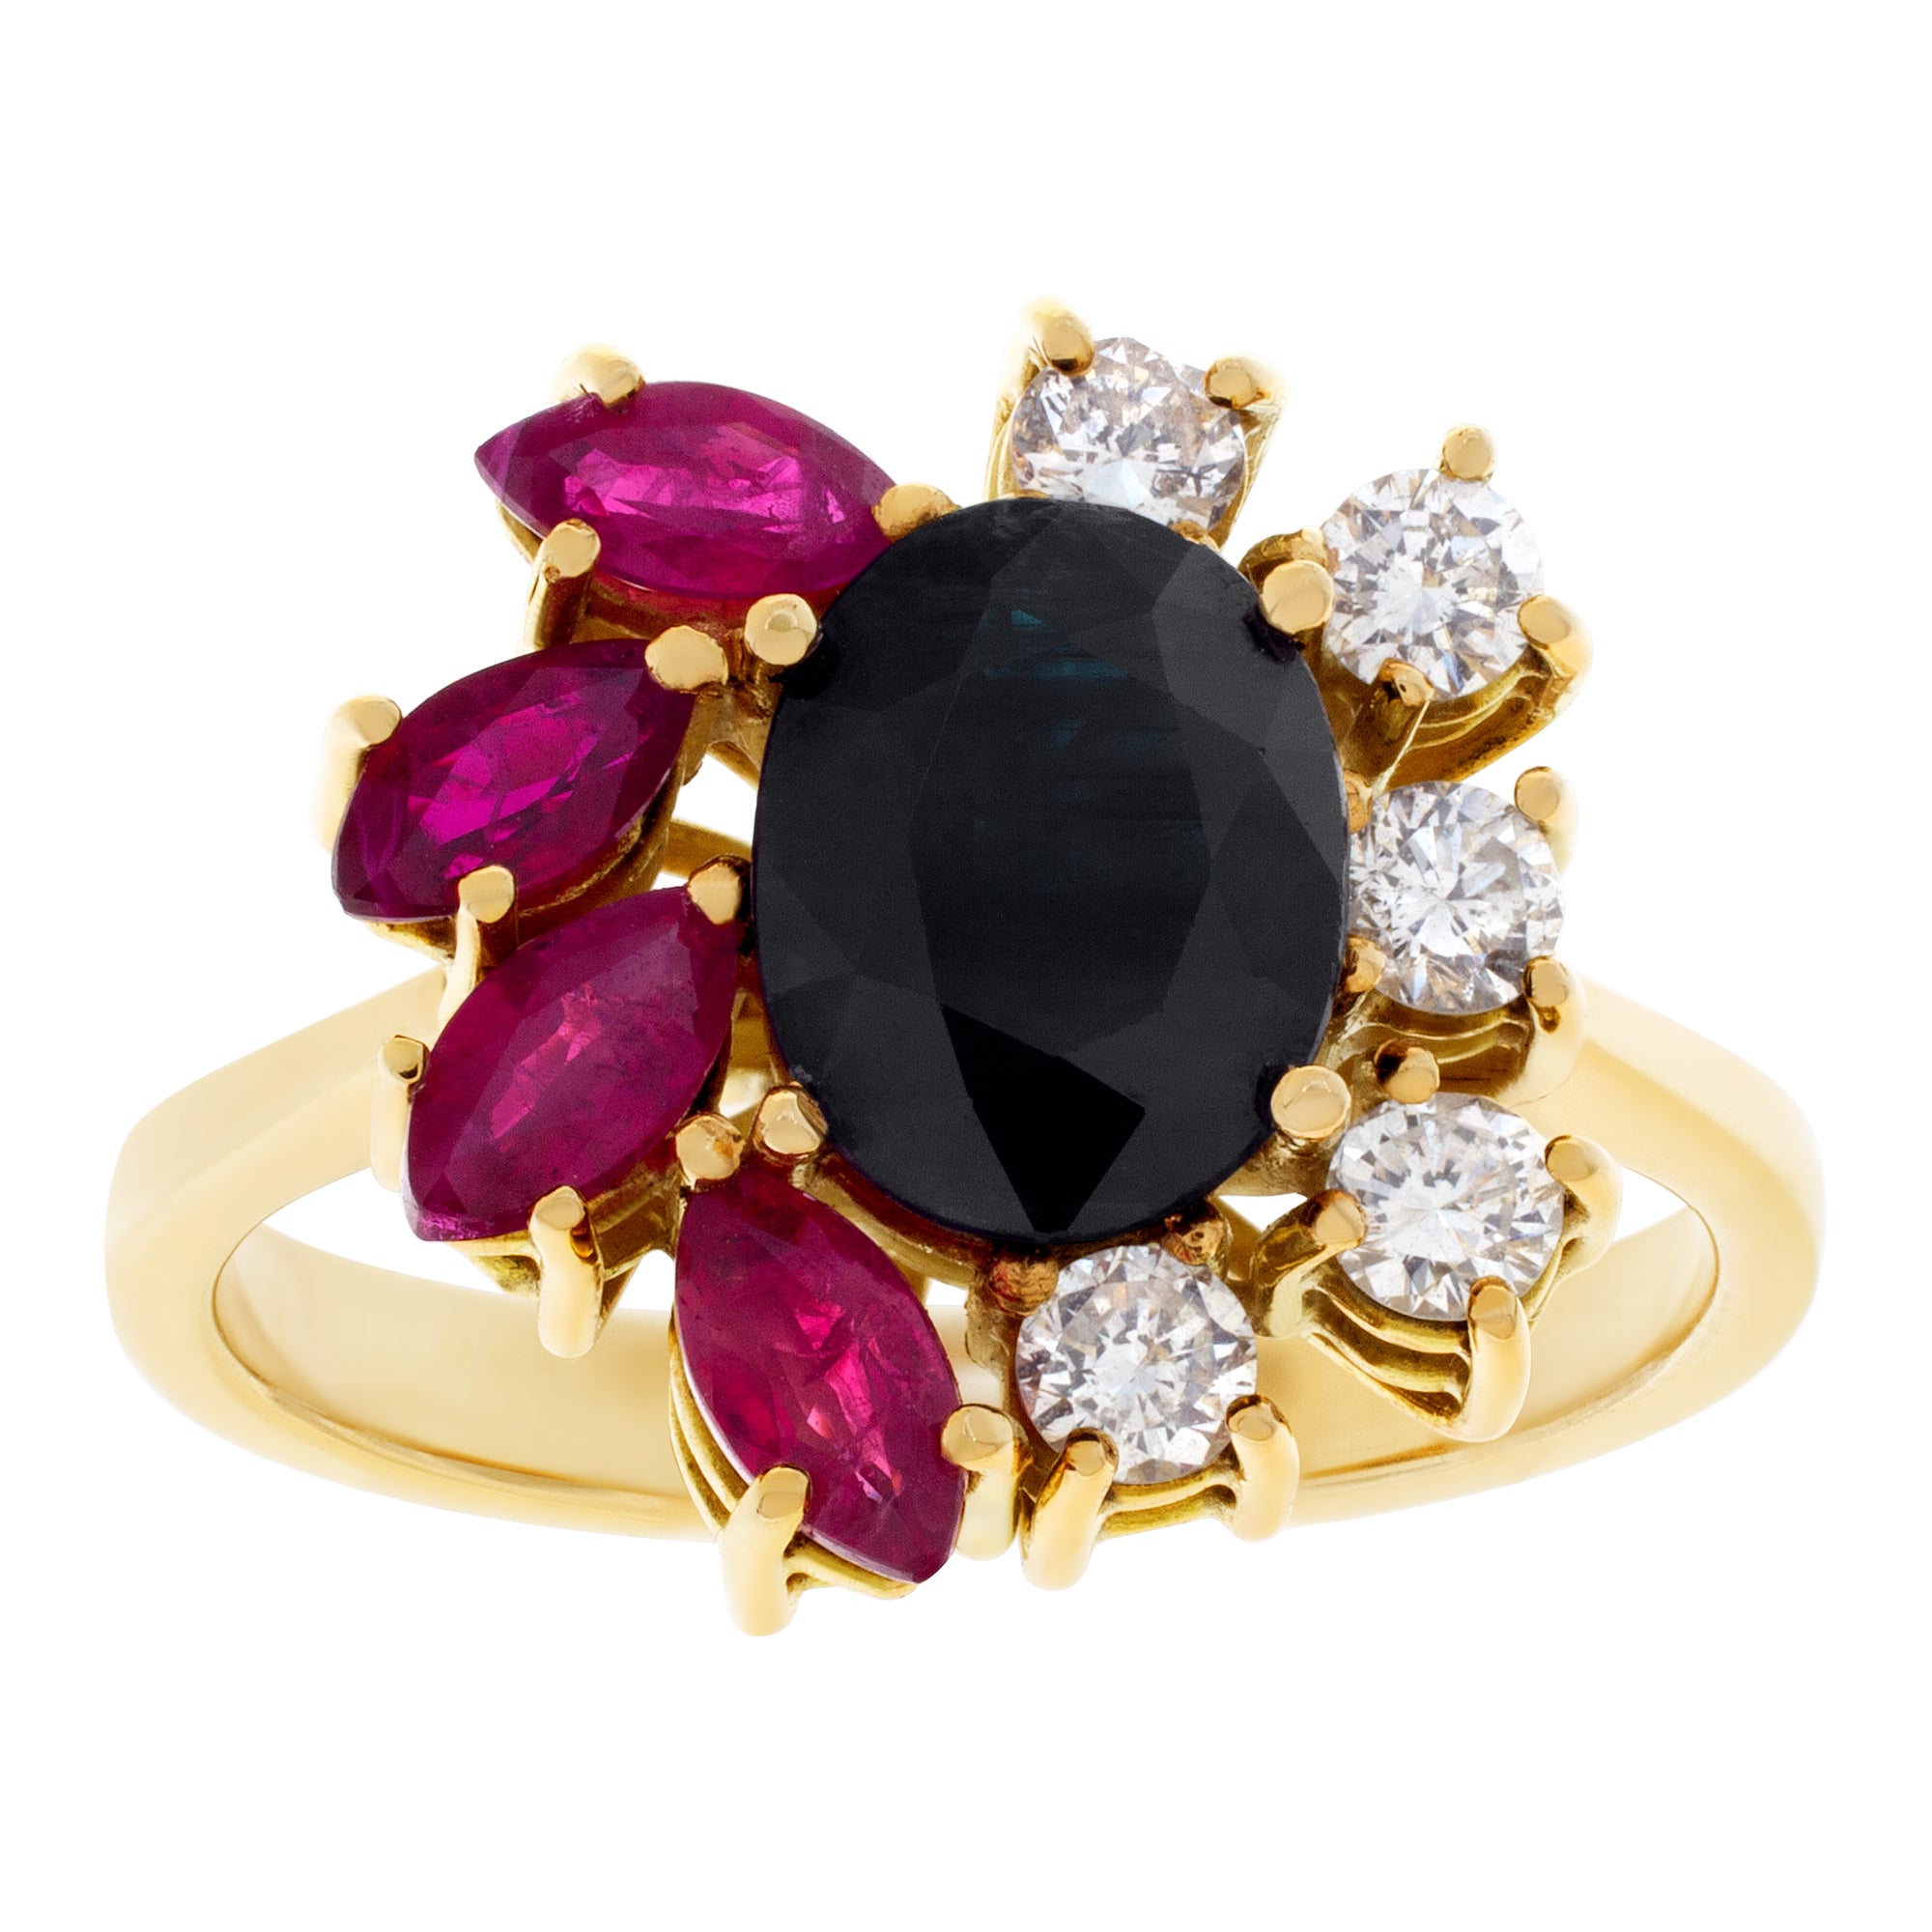 Ring with Rubies, Sapphires and Diamonds in 18k Gold, Flower Style